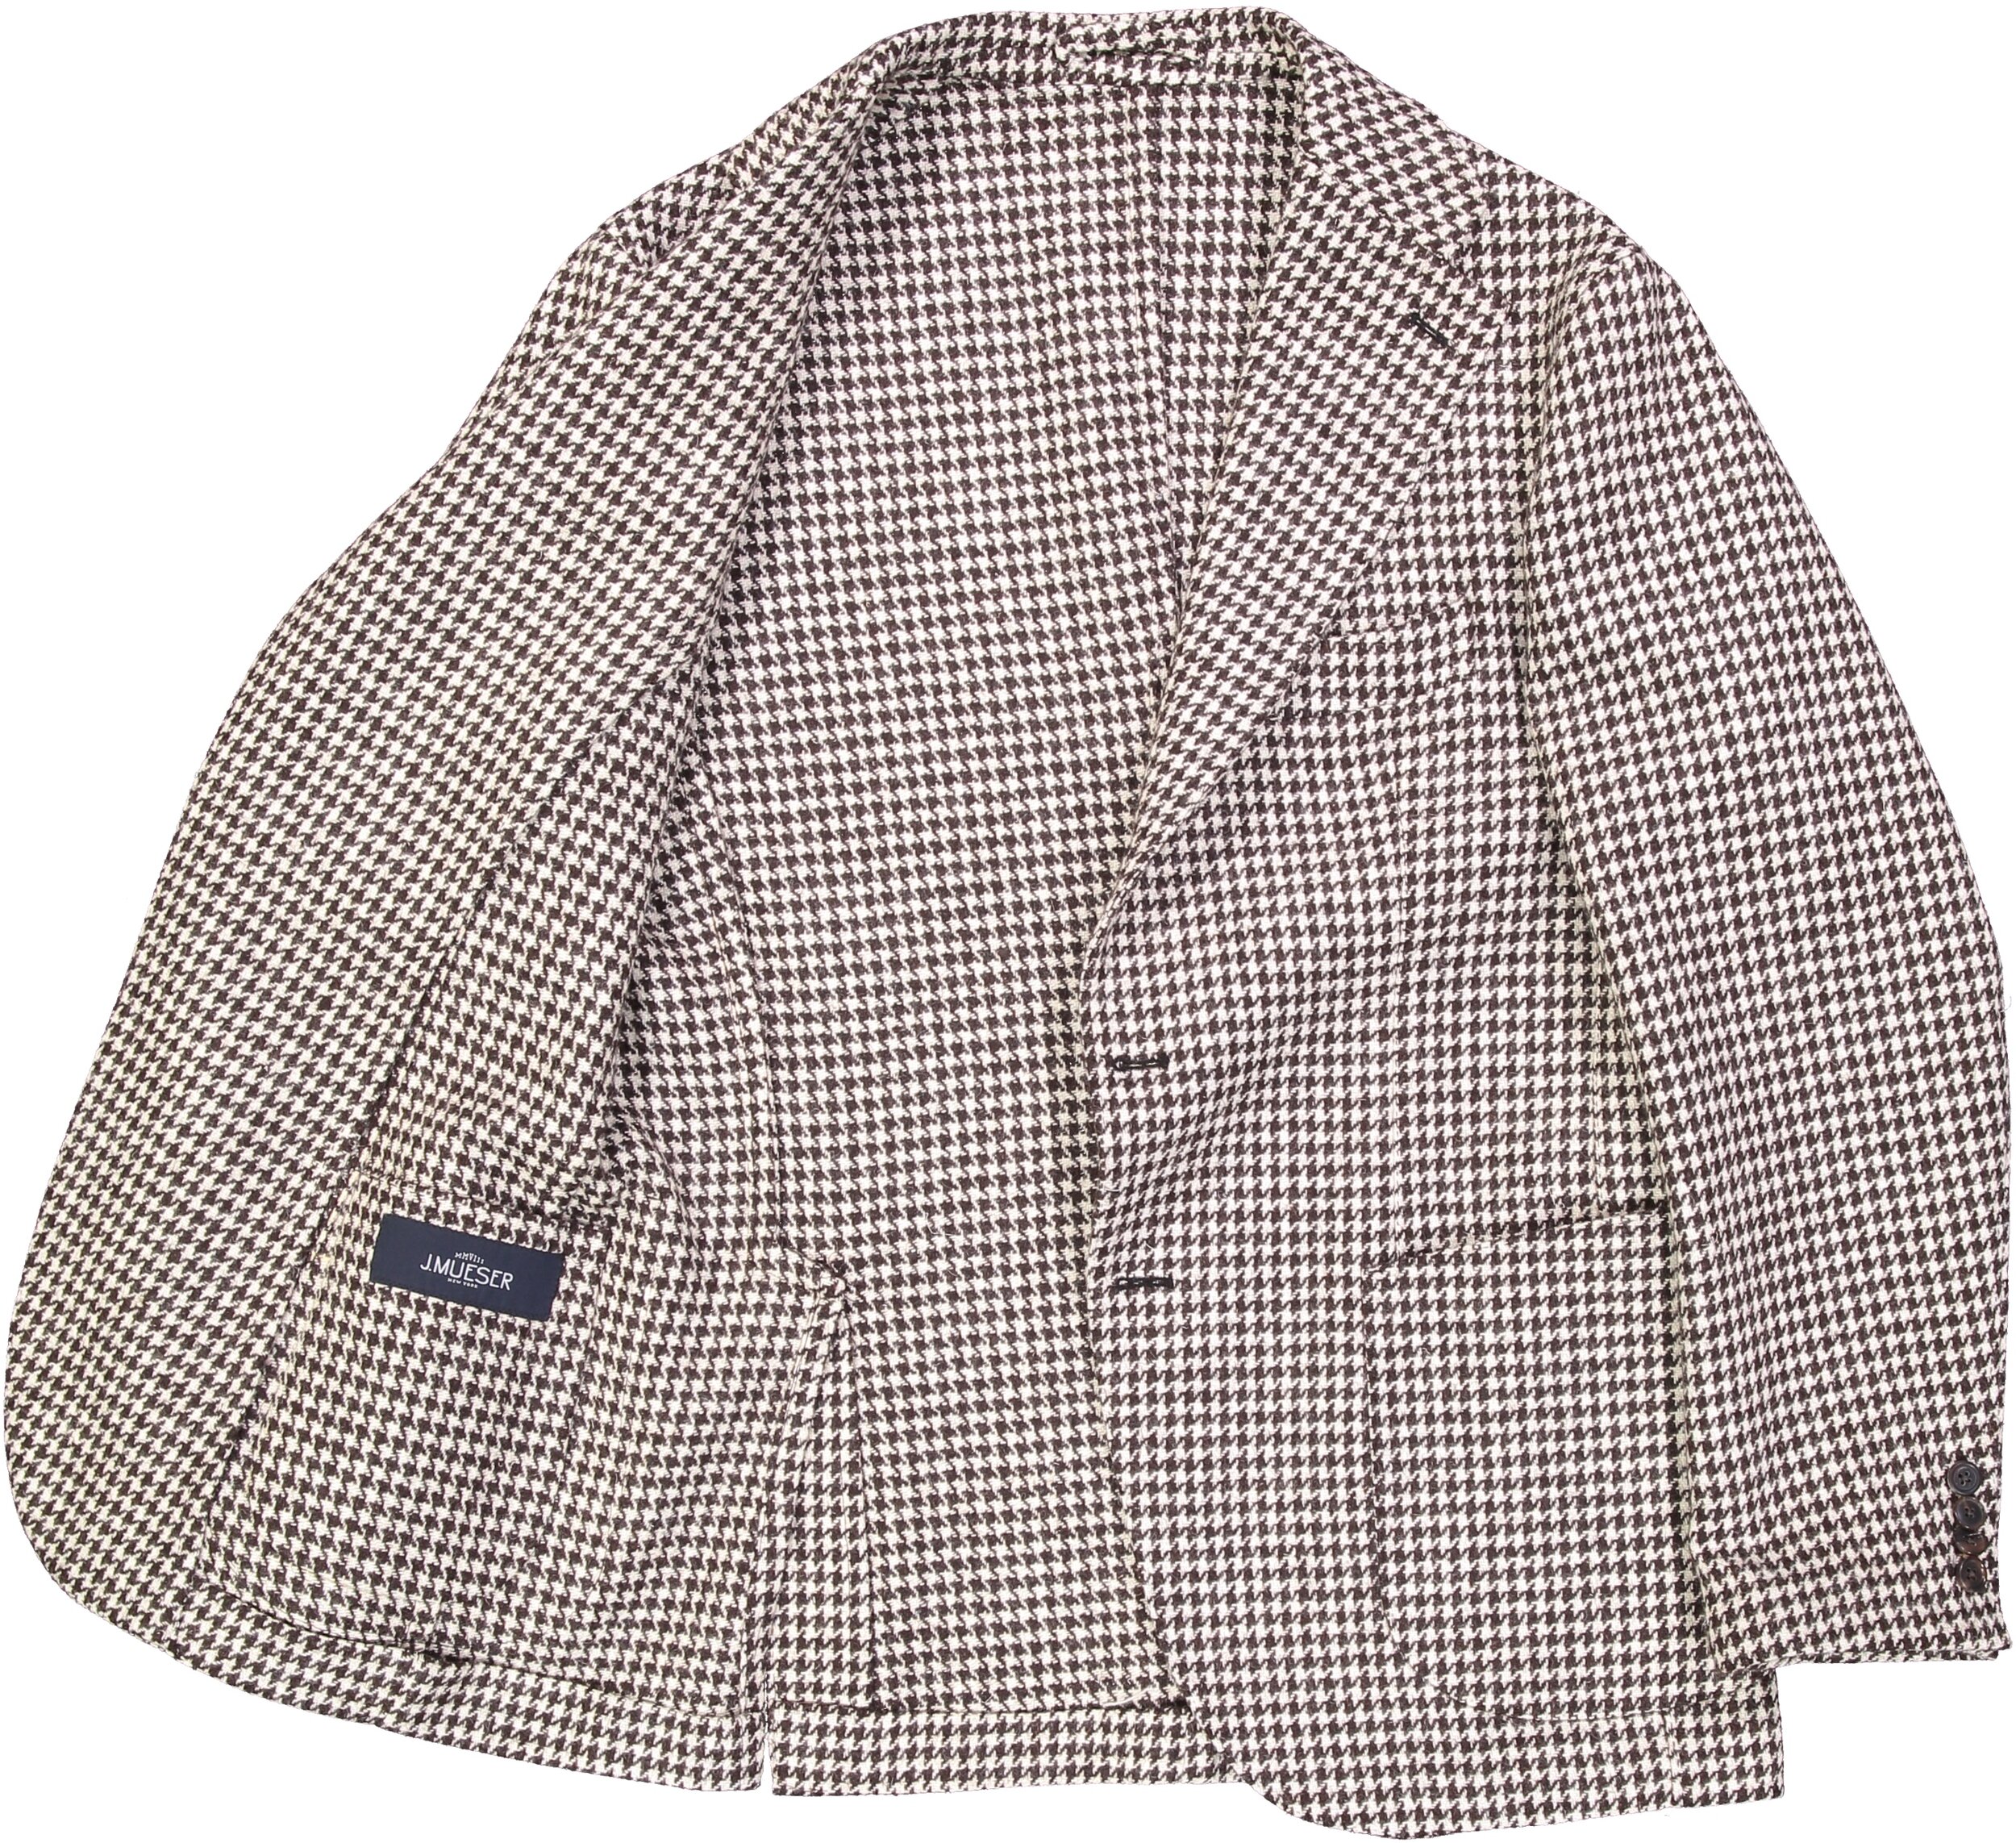 PERFECTLY MEASURED: THE J. MUESER CAMPANIA JACKET — The Contender